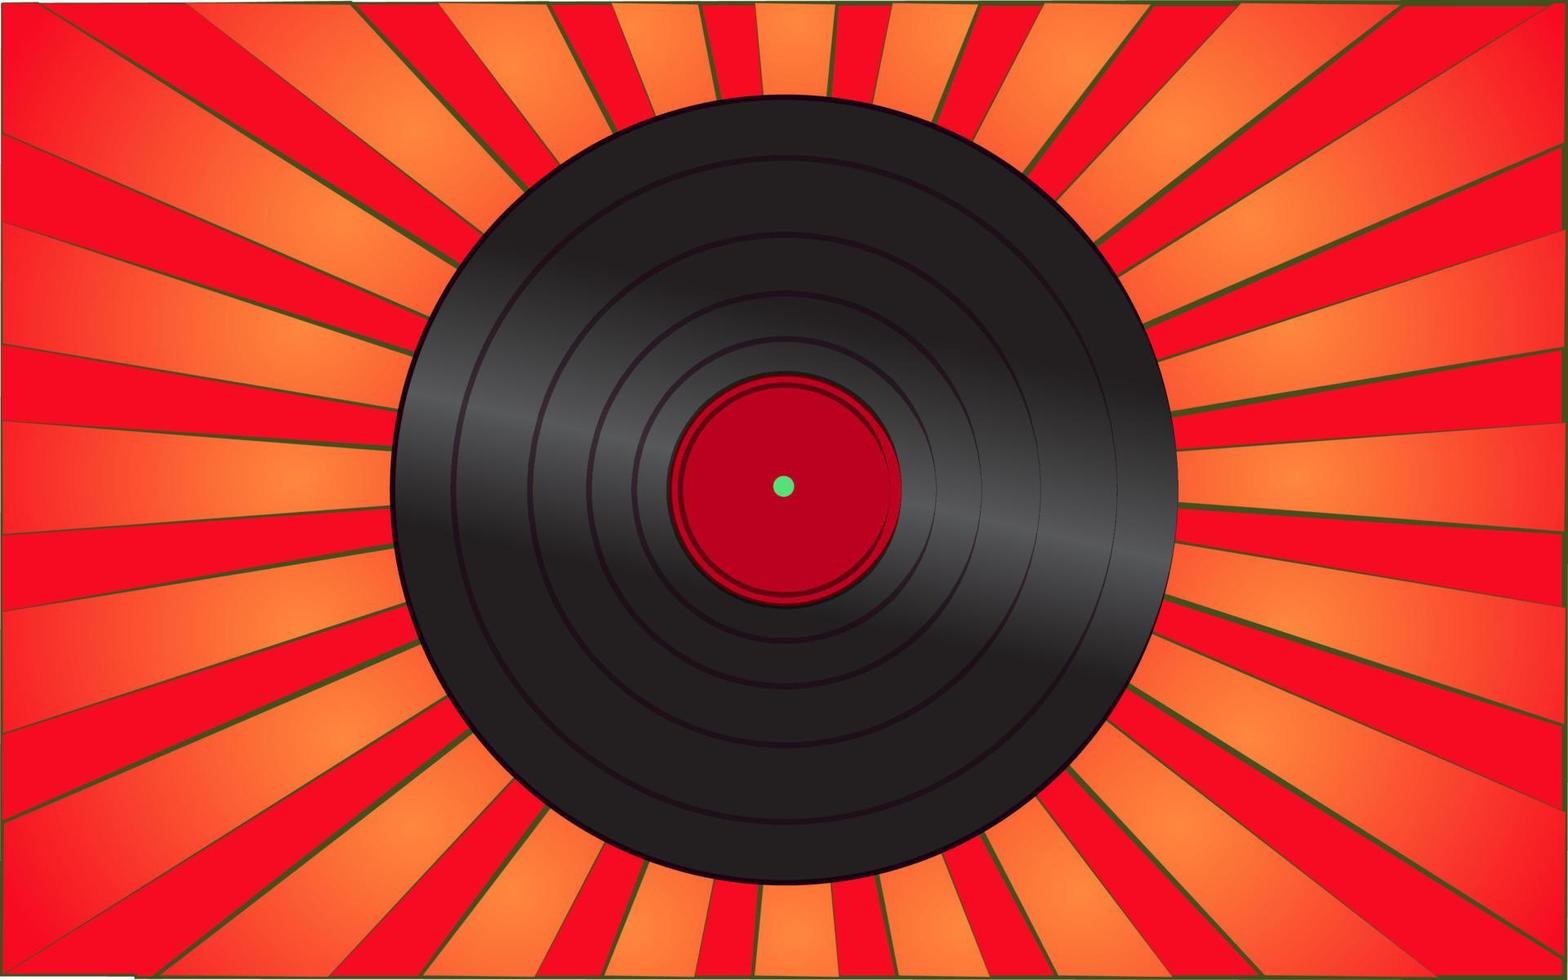 Retro old antique hipster musical vinyl record from the 70s, 80s, 90s, 2000s against a background of abstract red rays. Vector illustration